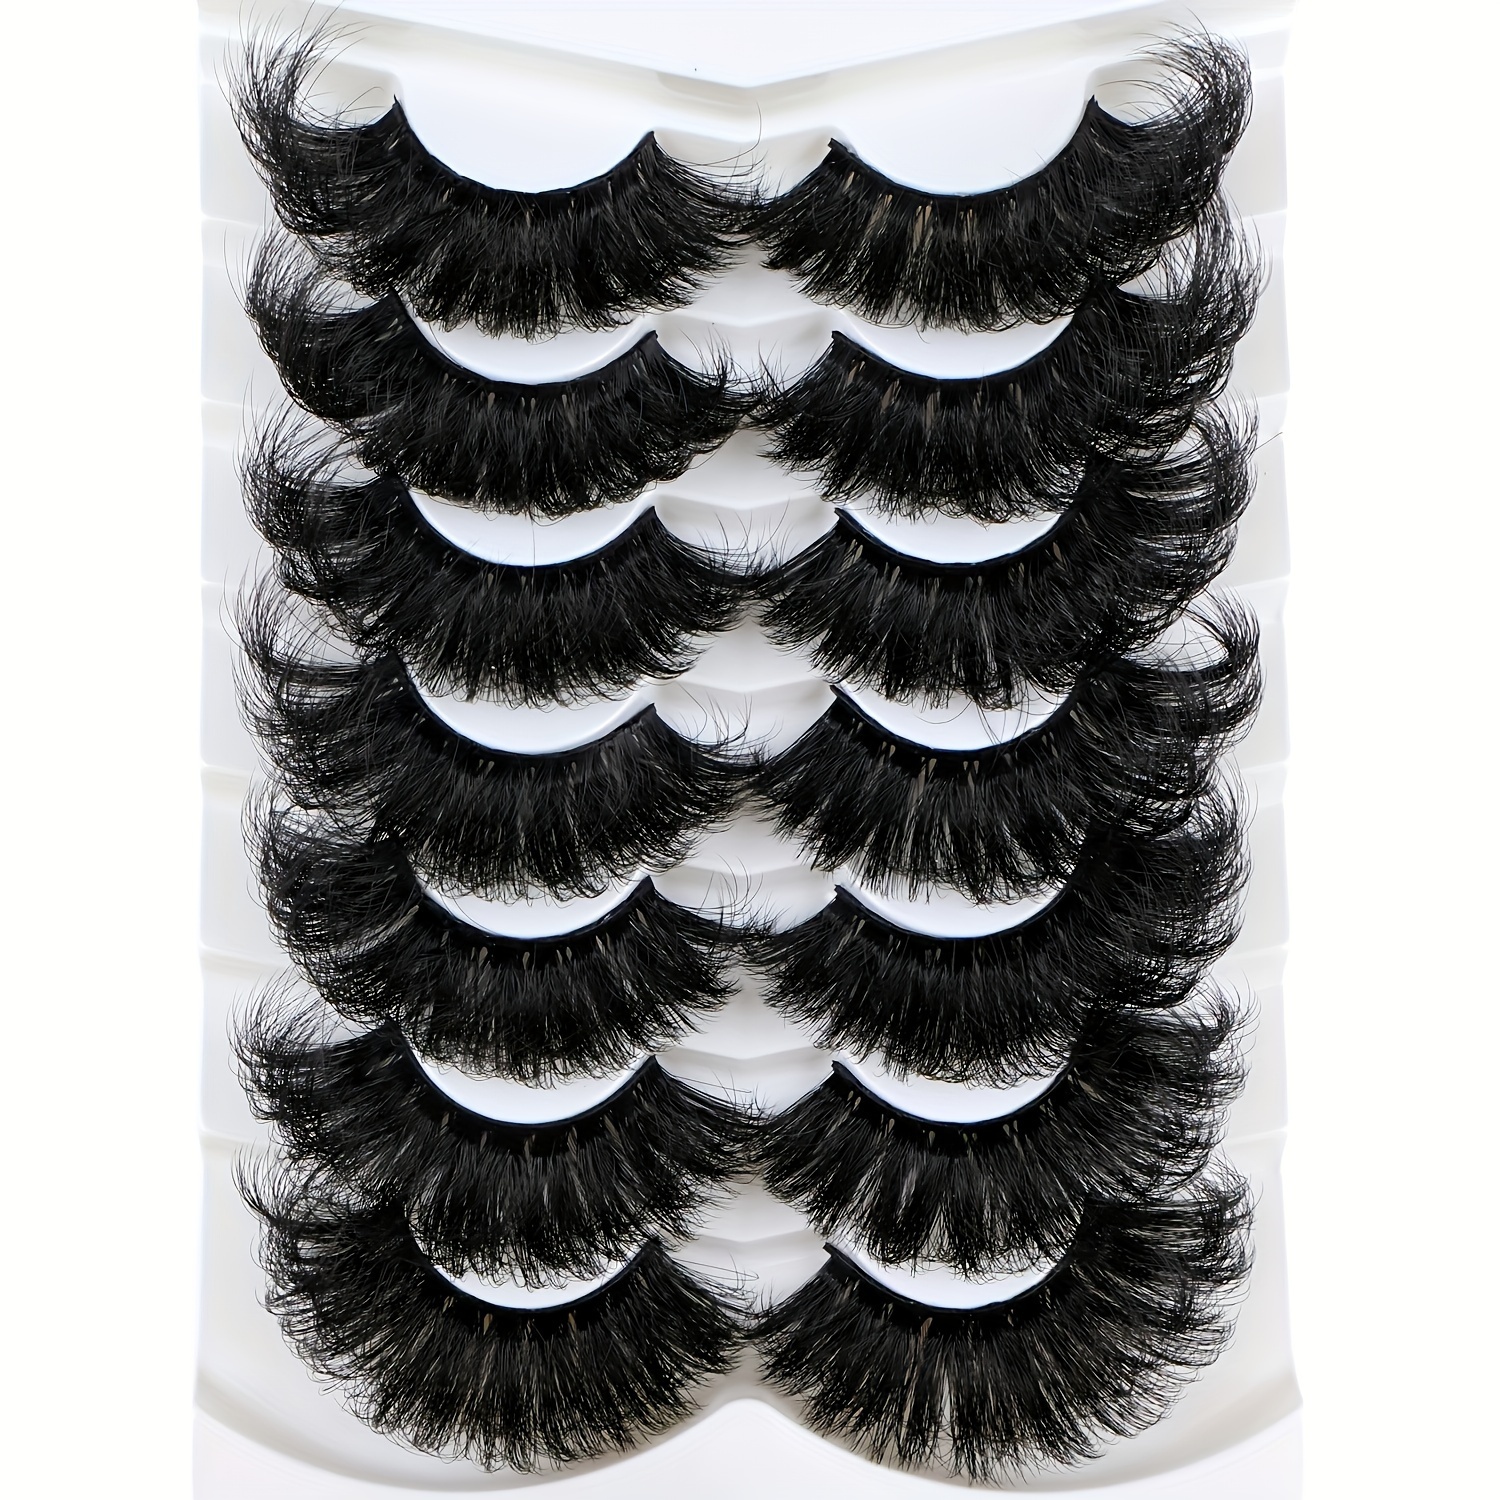 

7 Pairs False Eyelashes Fluffy Soft 9d Thick 25mm Russian Strip D Curling Dramatic Eyelashes Extension Natural Makeup